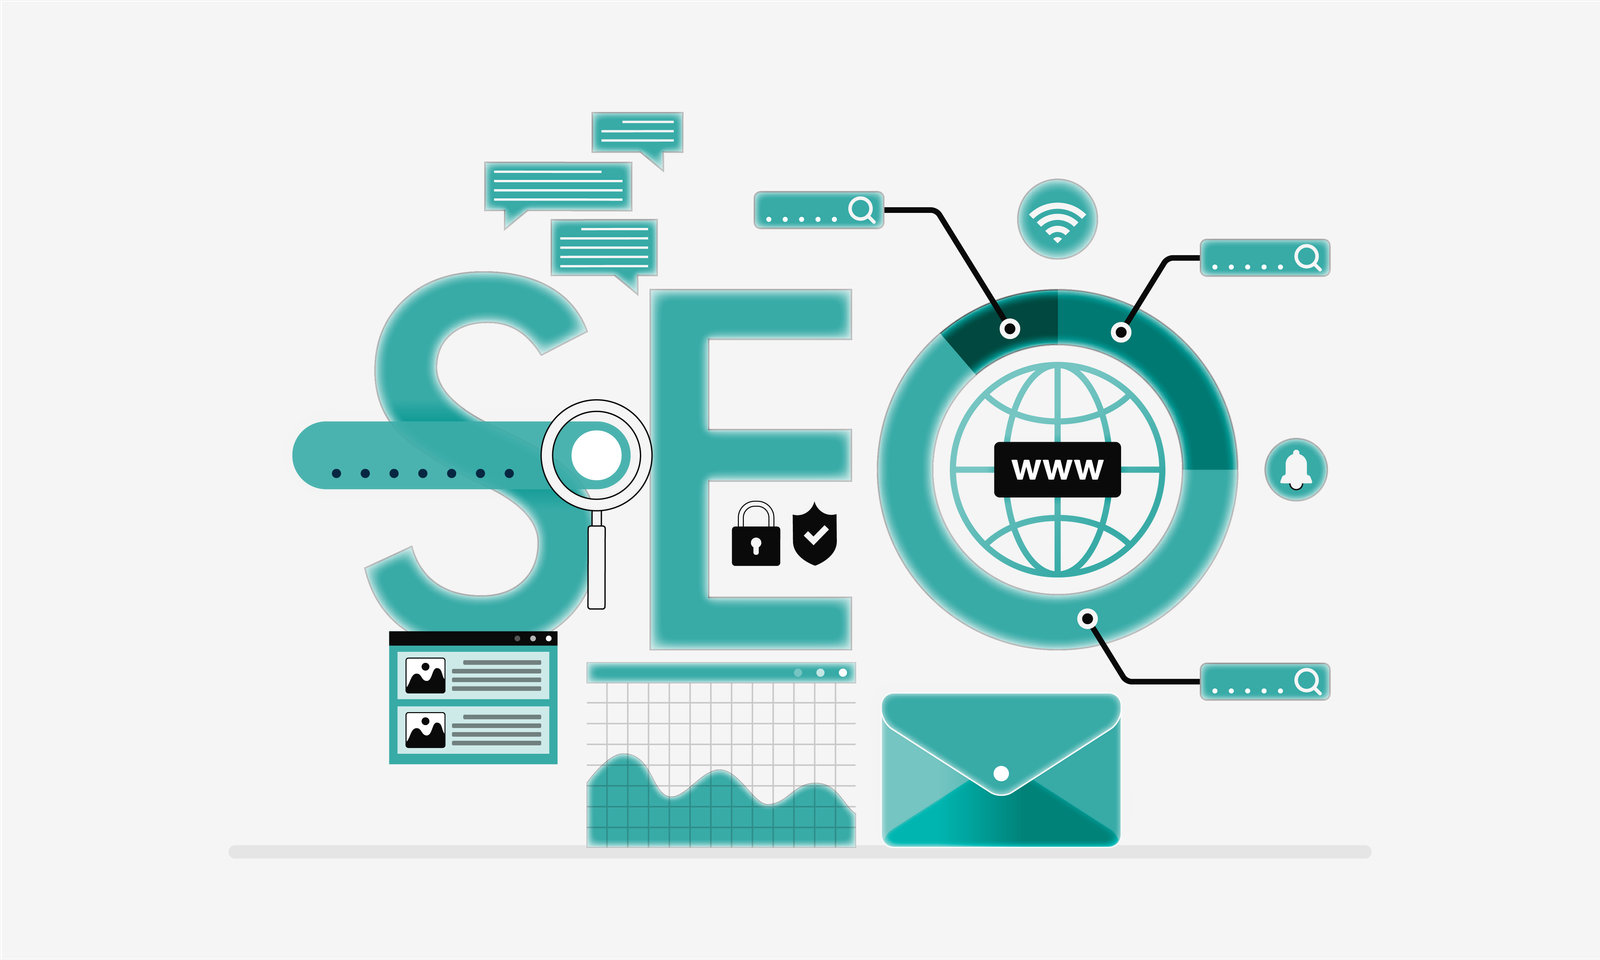 What are the differences between traditional SEO and Modern SEO